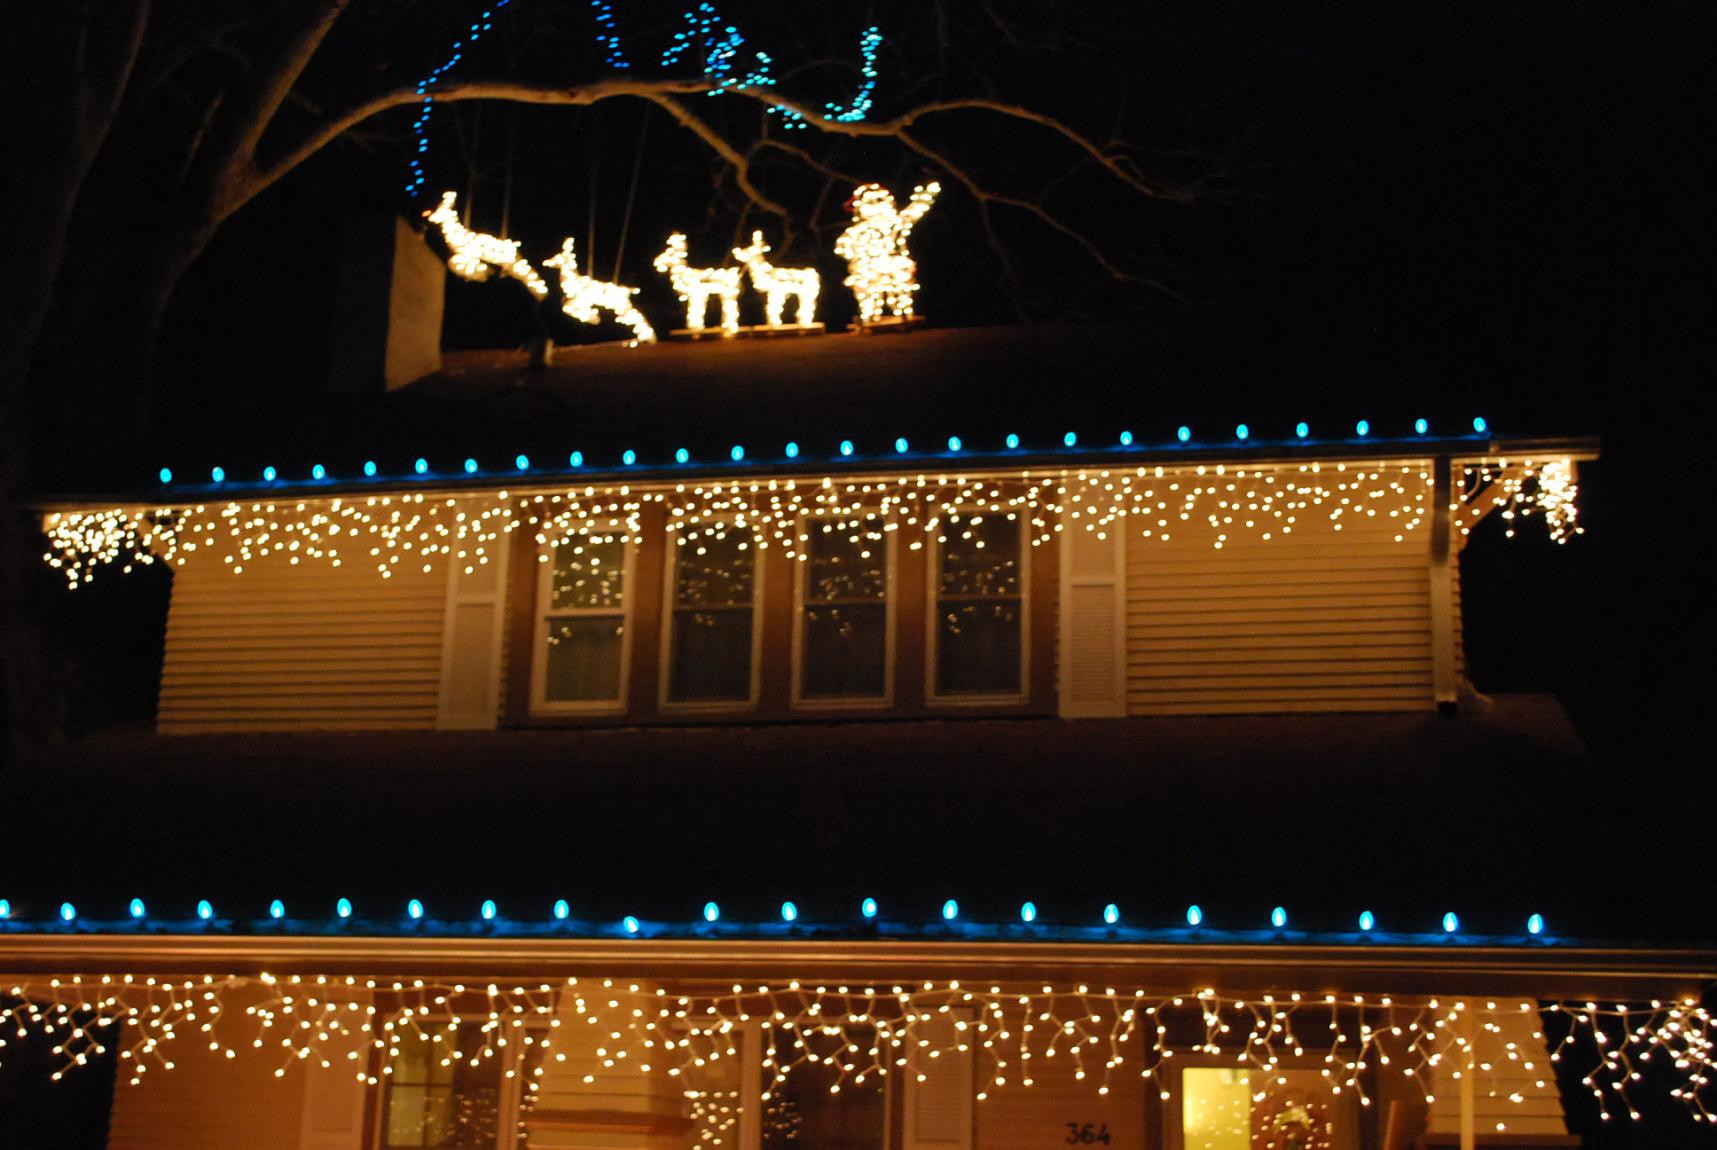 Christmas Rooftop Decorations
 Help Me Figure Out How To Install Lighted Sled Roof